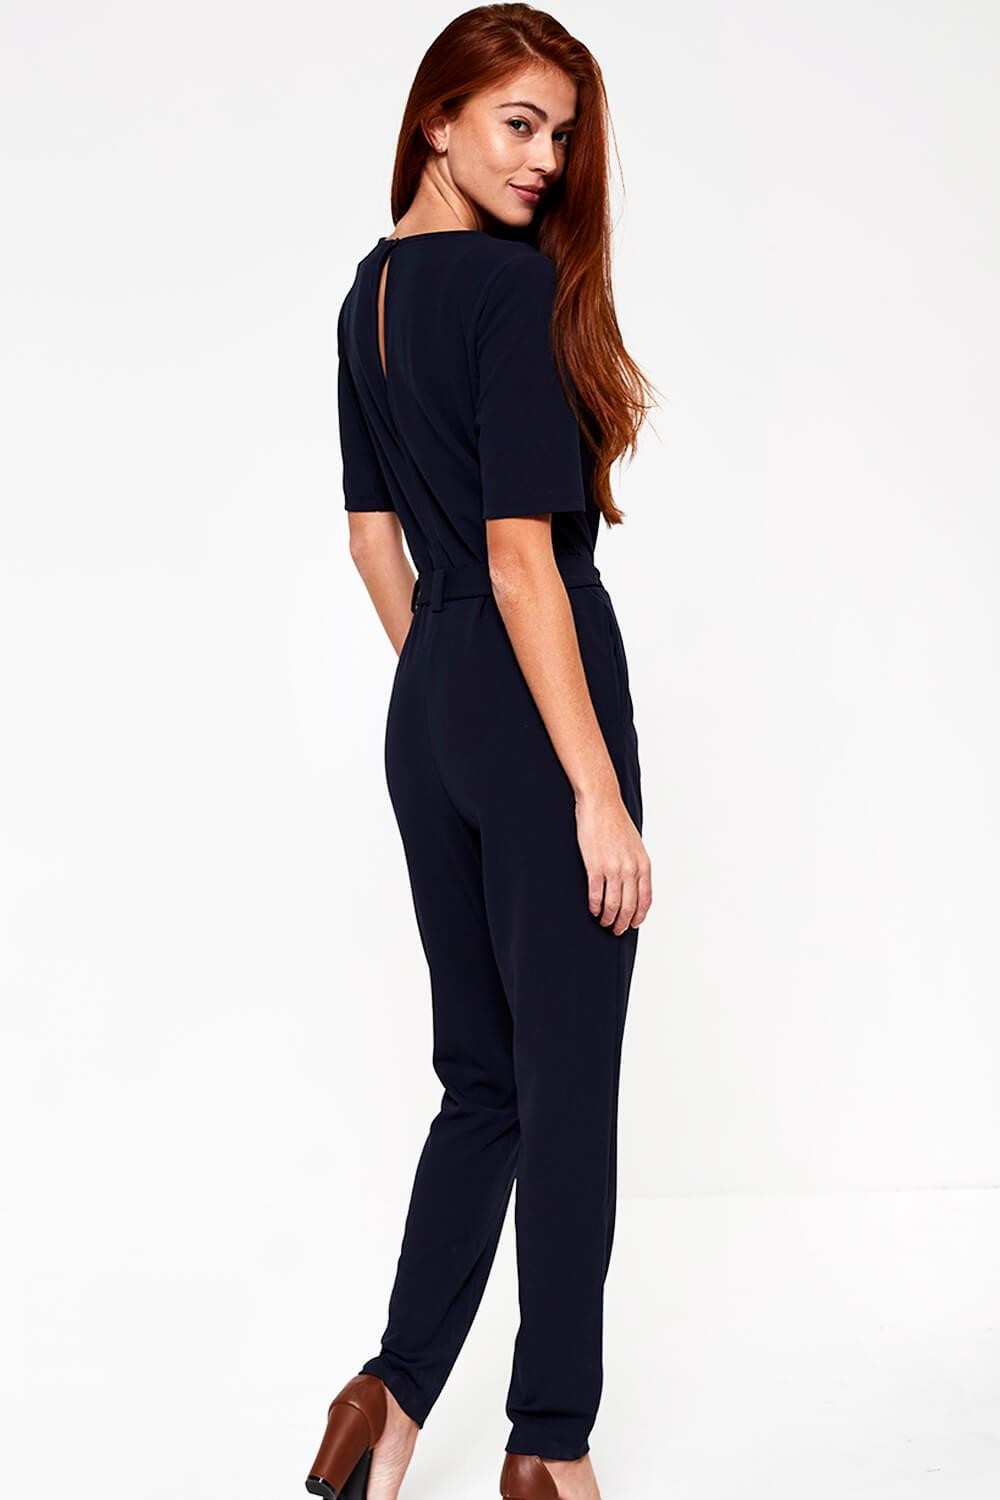 JDY Diana Jumpsuit in Navy | iCLOTHING